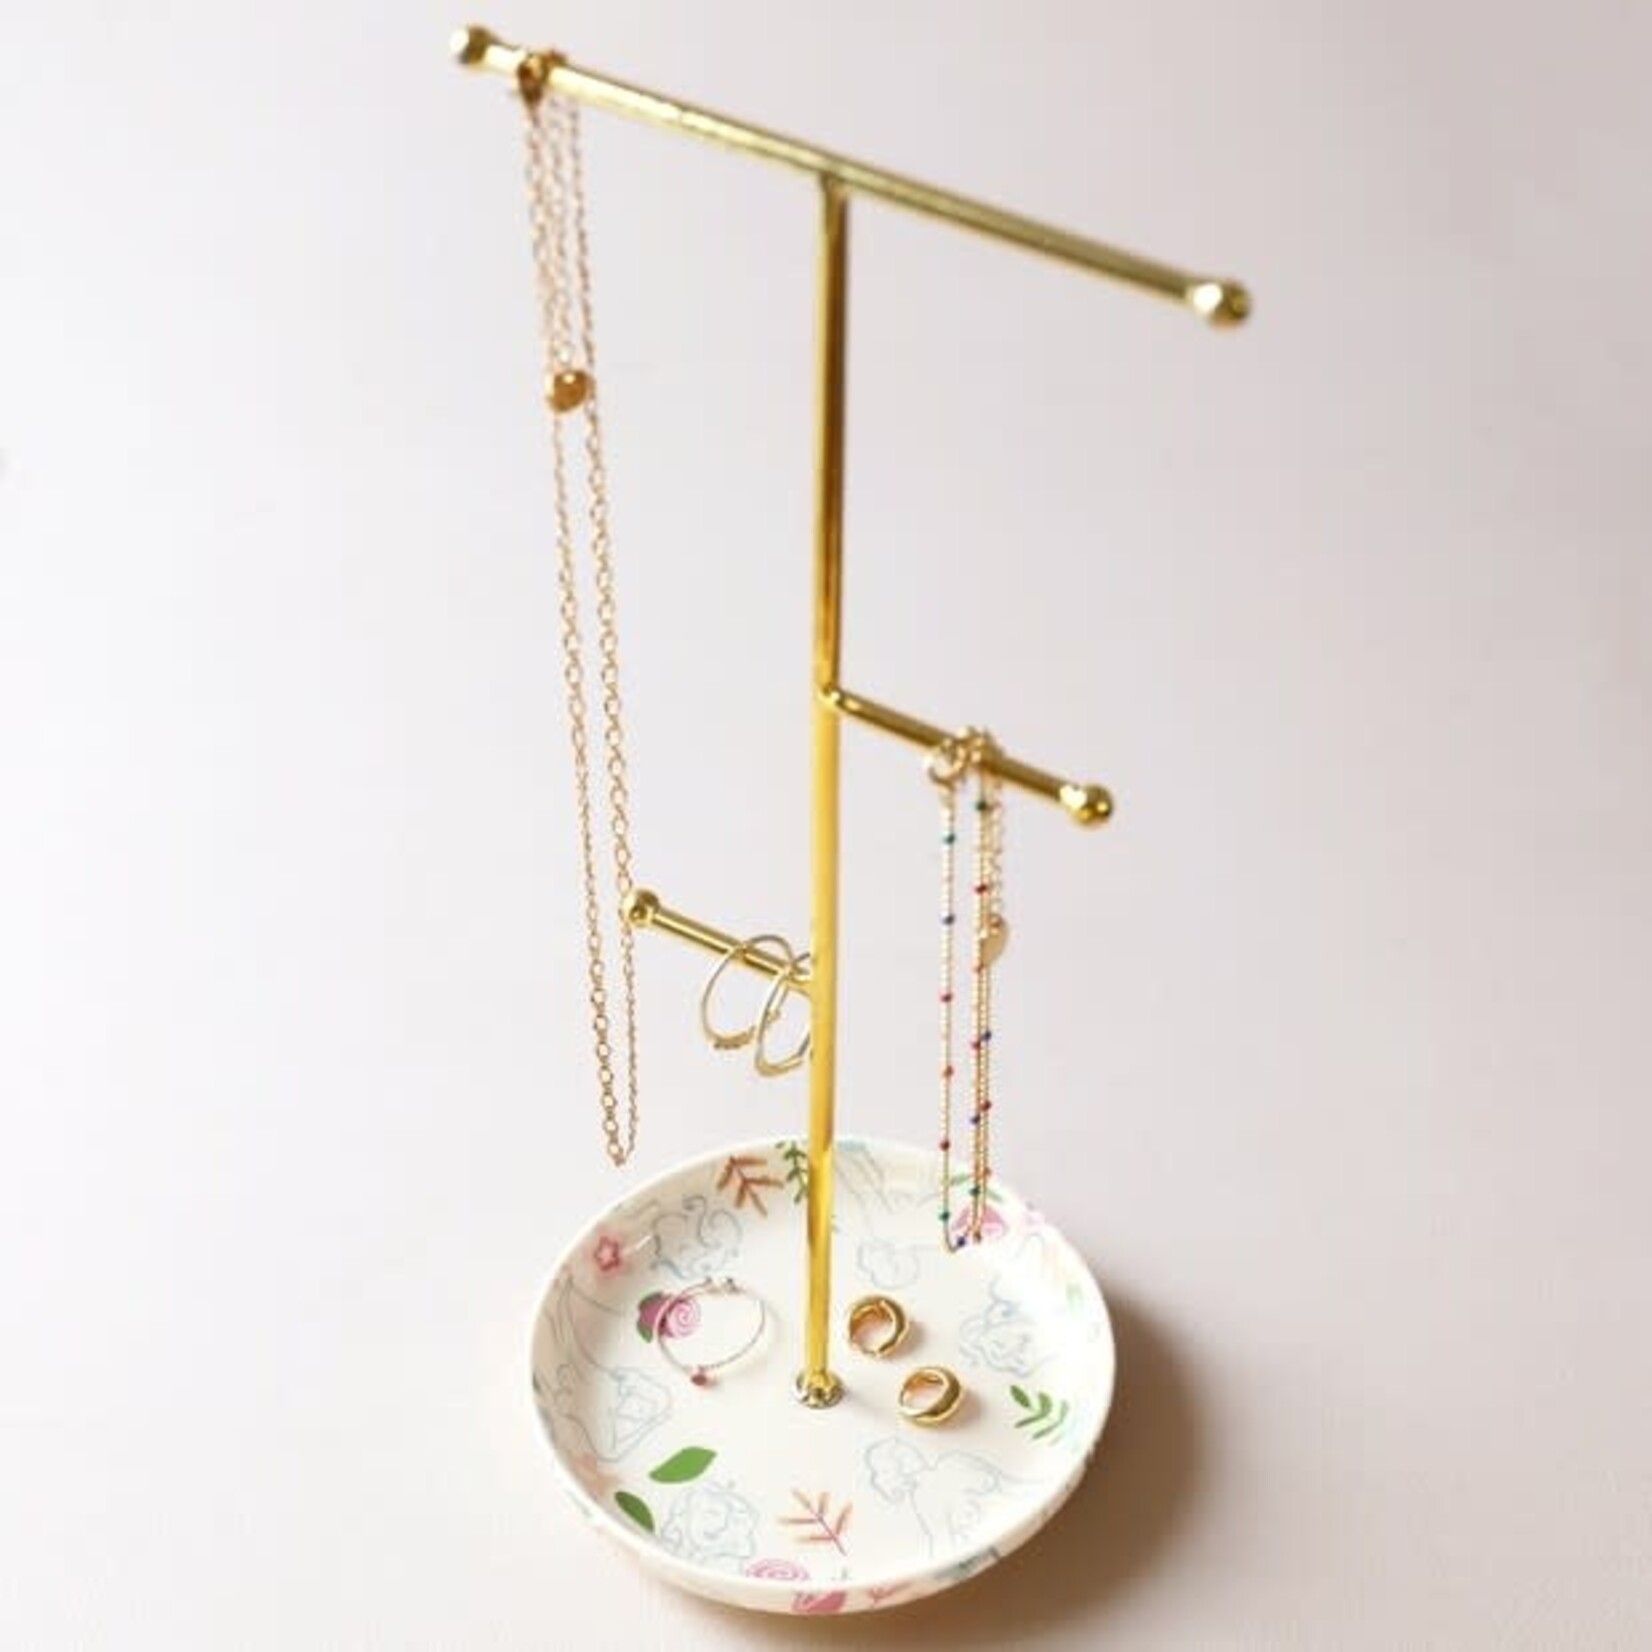 Lisa Angel Floral Figures Jewelry Stand